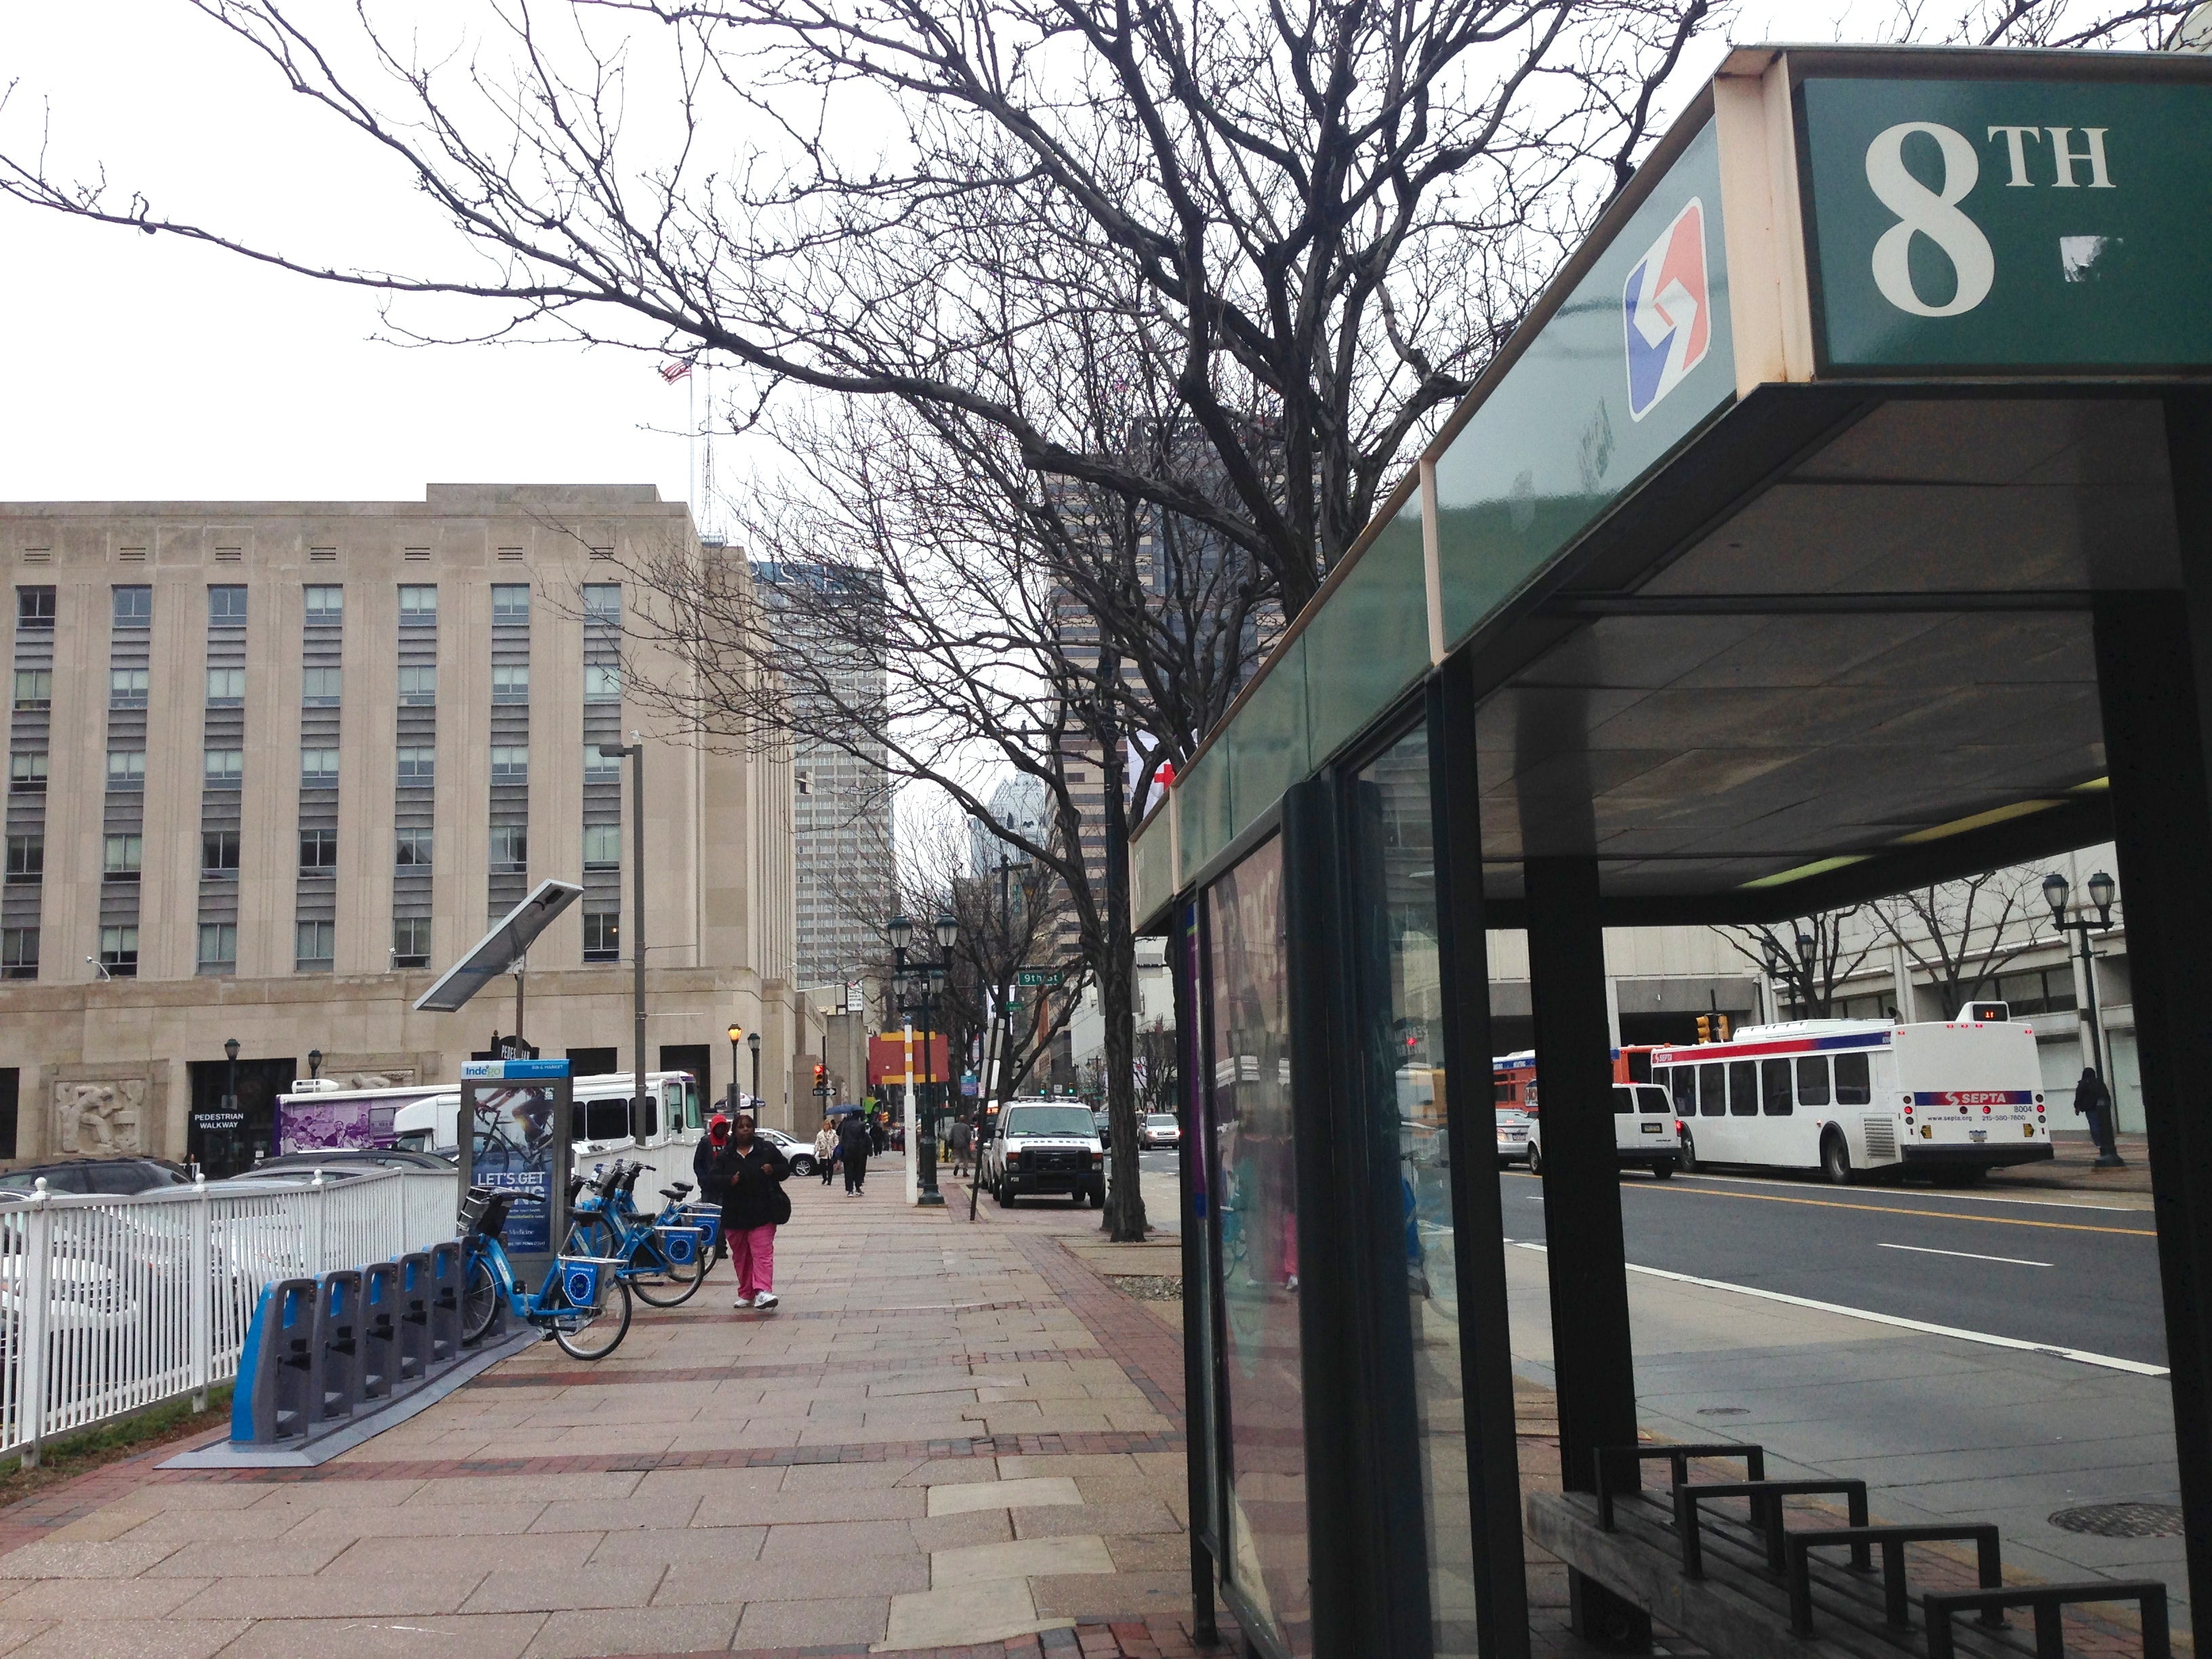 Bus shelter and Indego station on the 800 block of Market